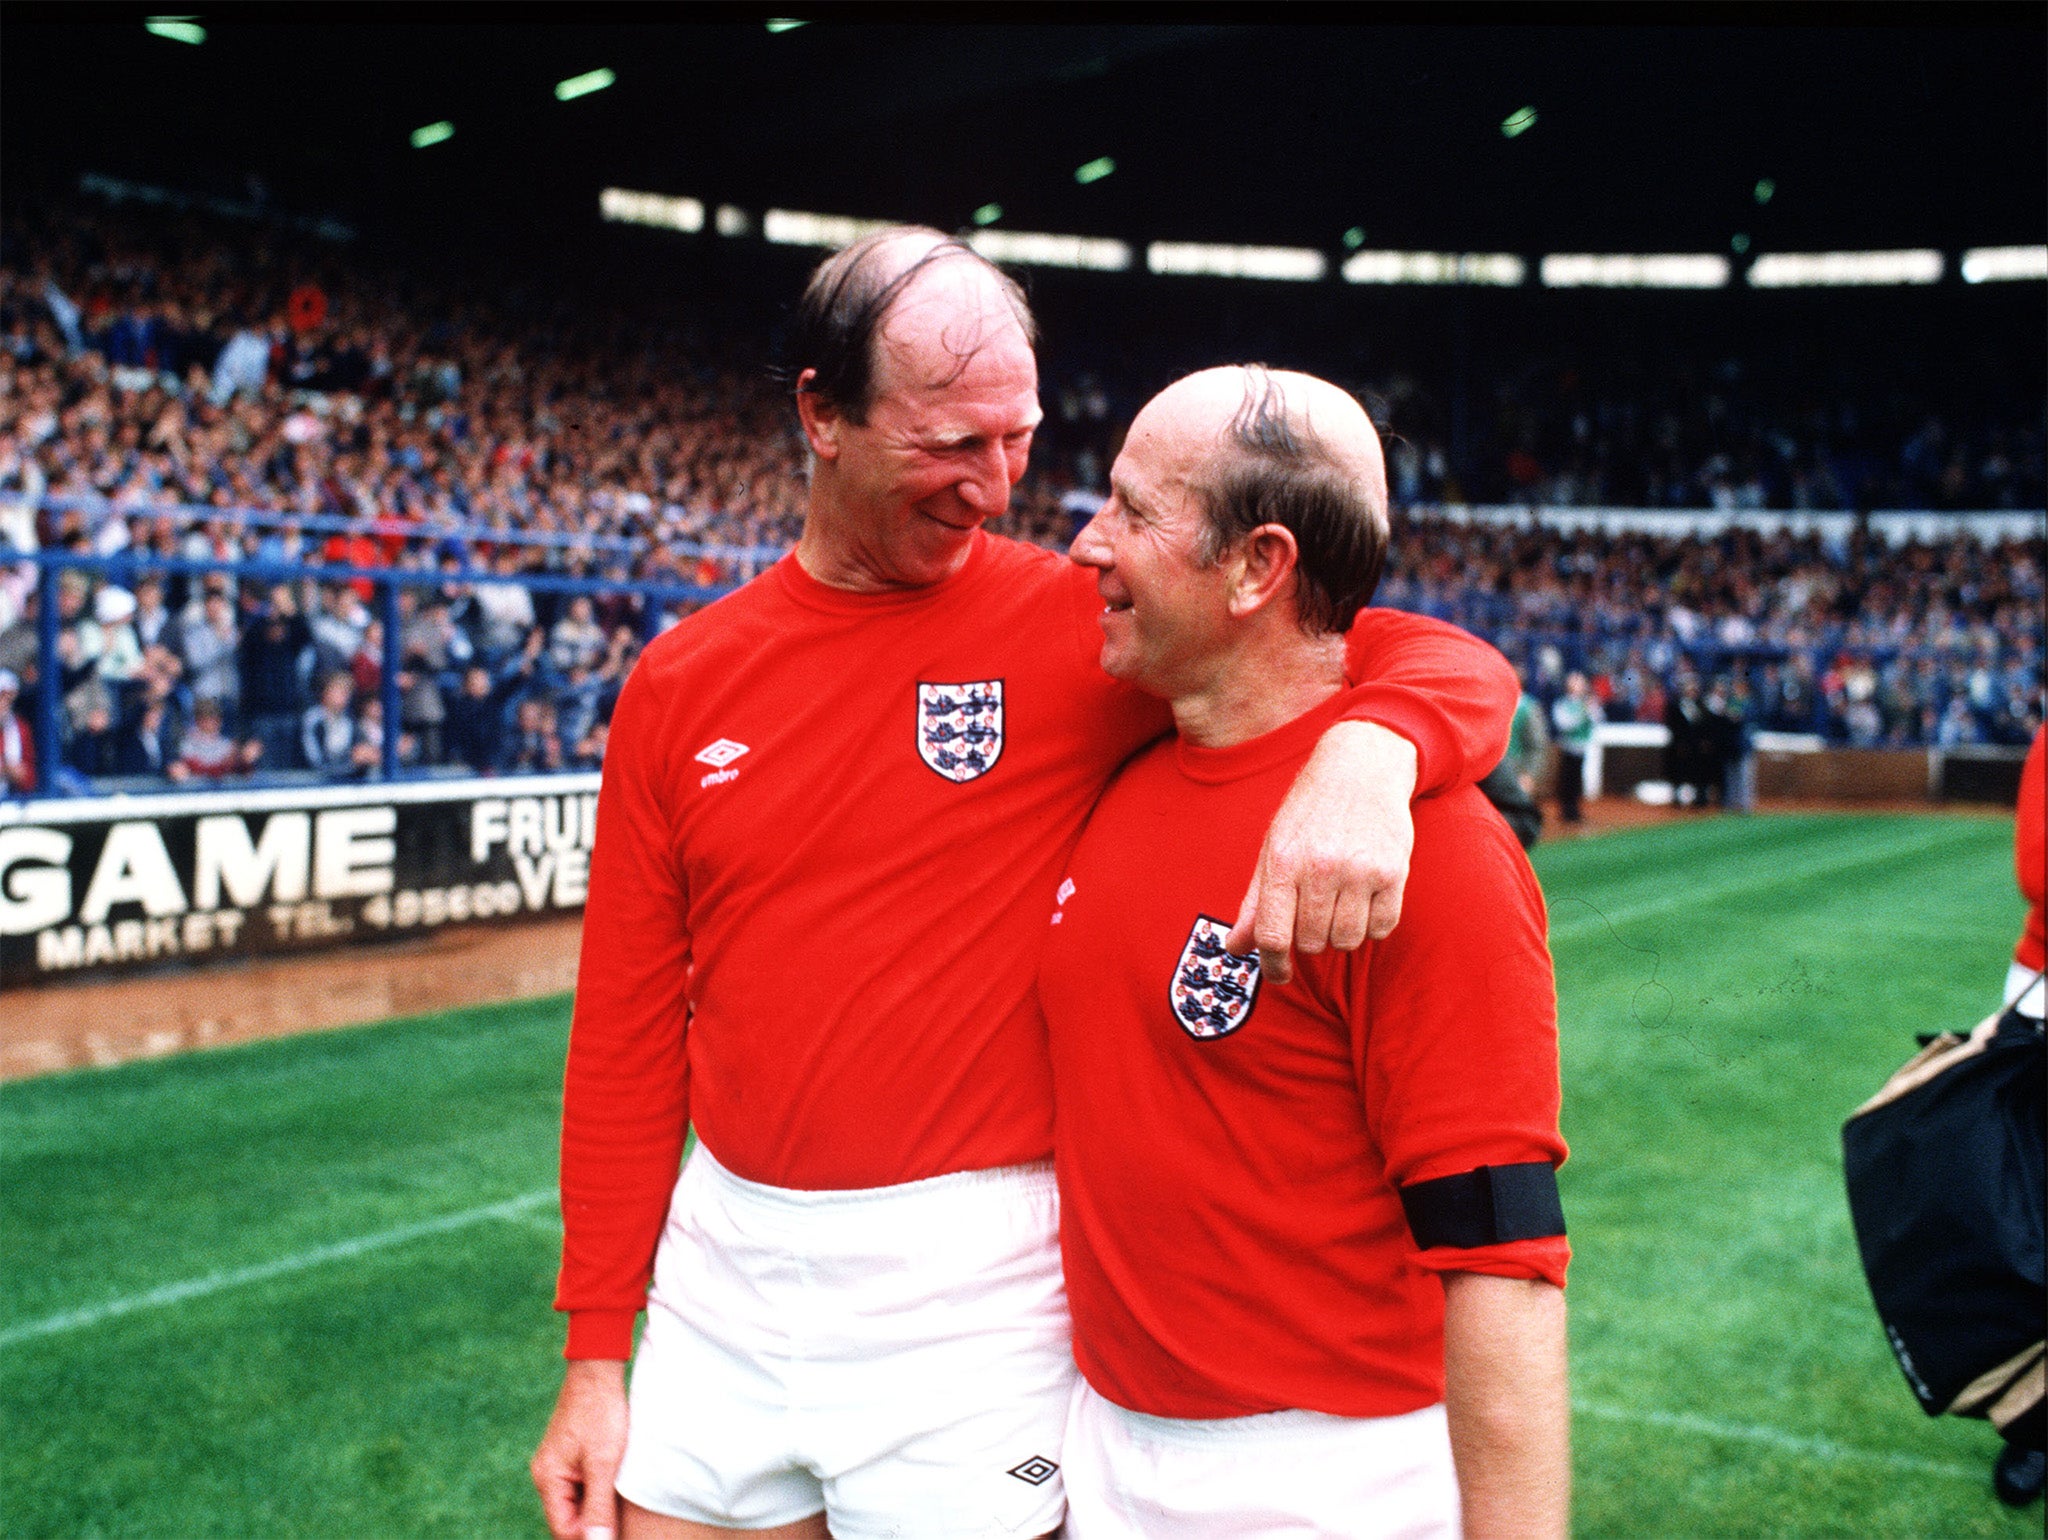 The Charlton brothers, Jack and Bobby, embrace at the end of a charity match at Elland Road, Leeds, in 1985